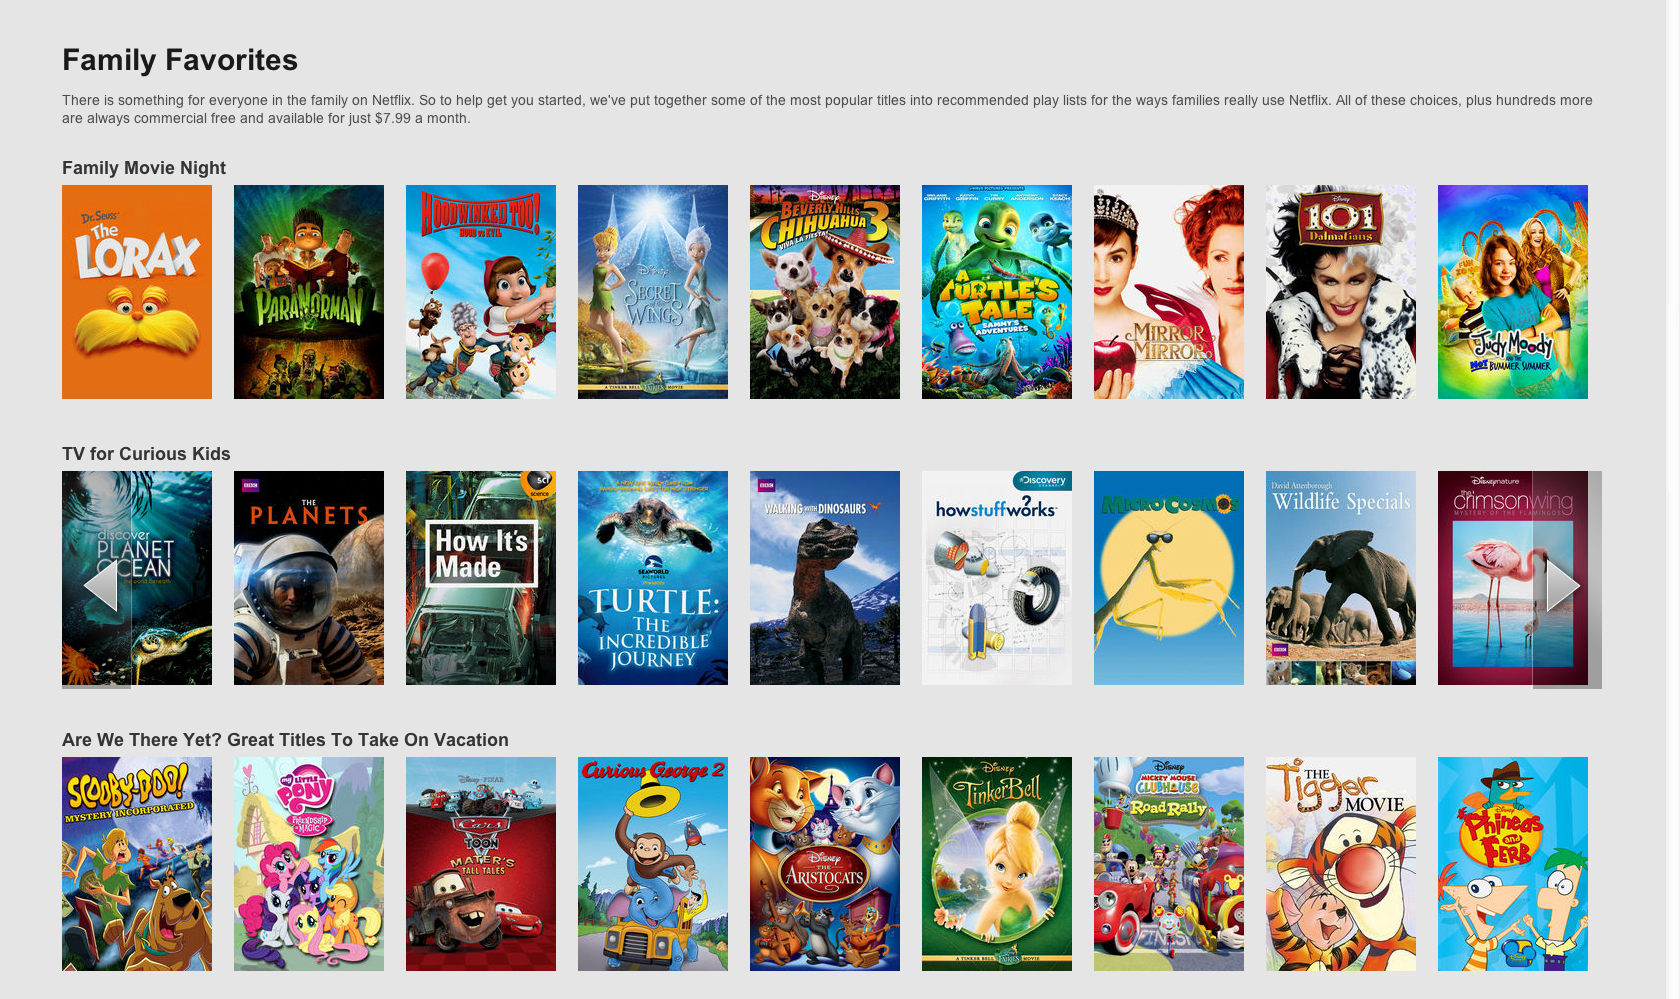 Summer entertainment made easy with Family Options from Netflix! #NetflixFamilies